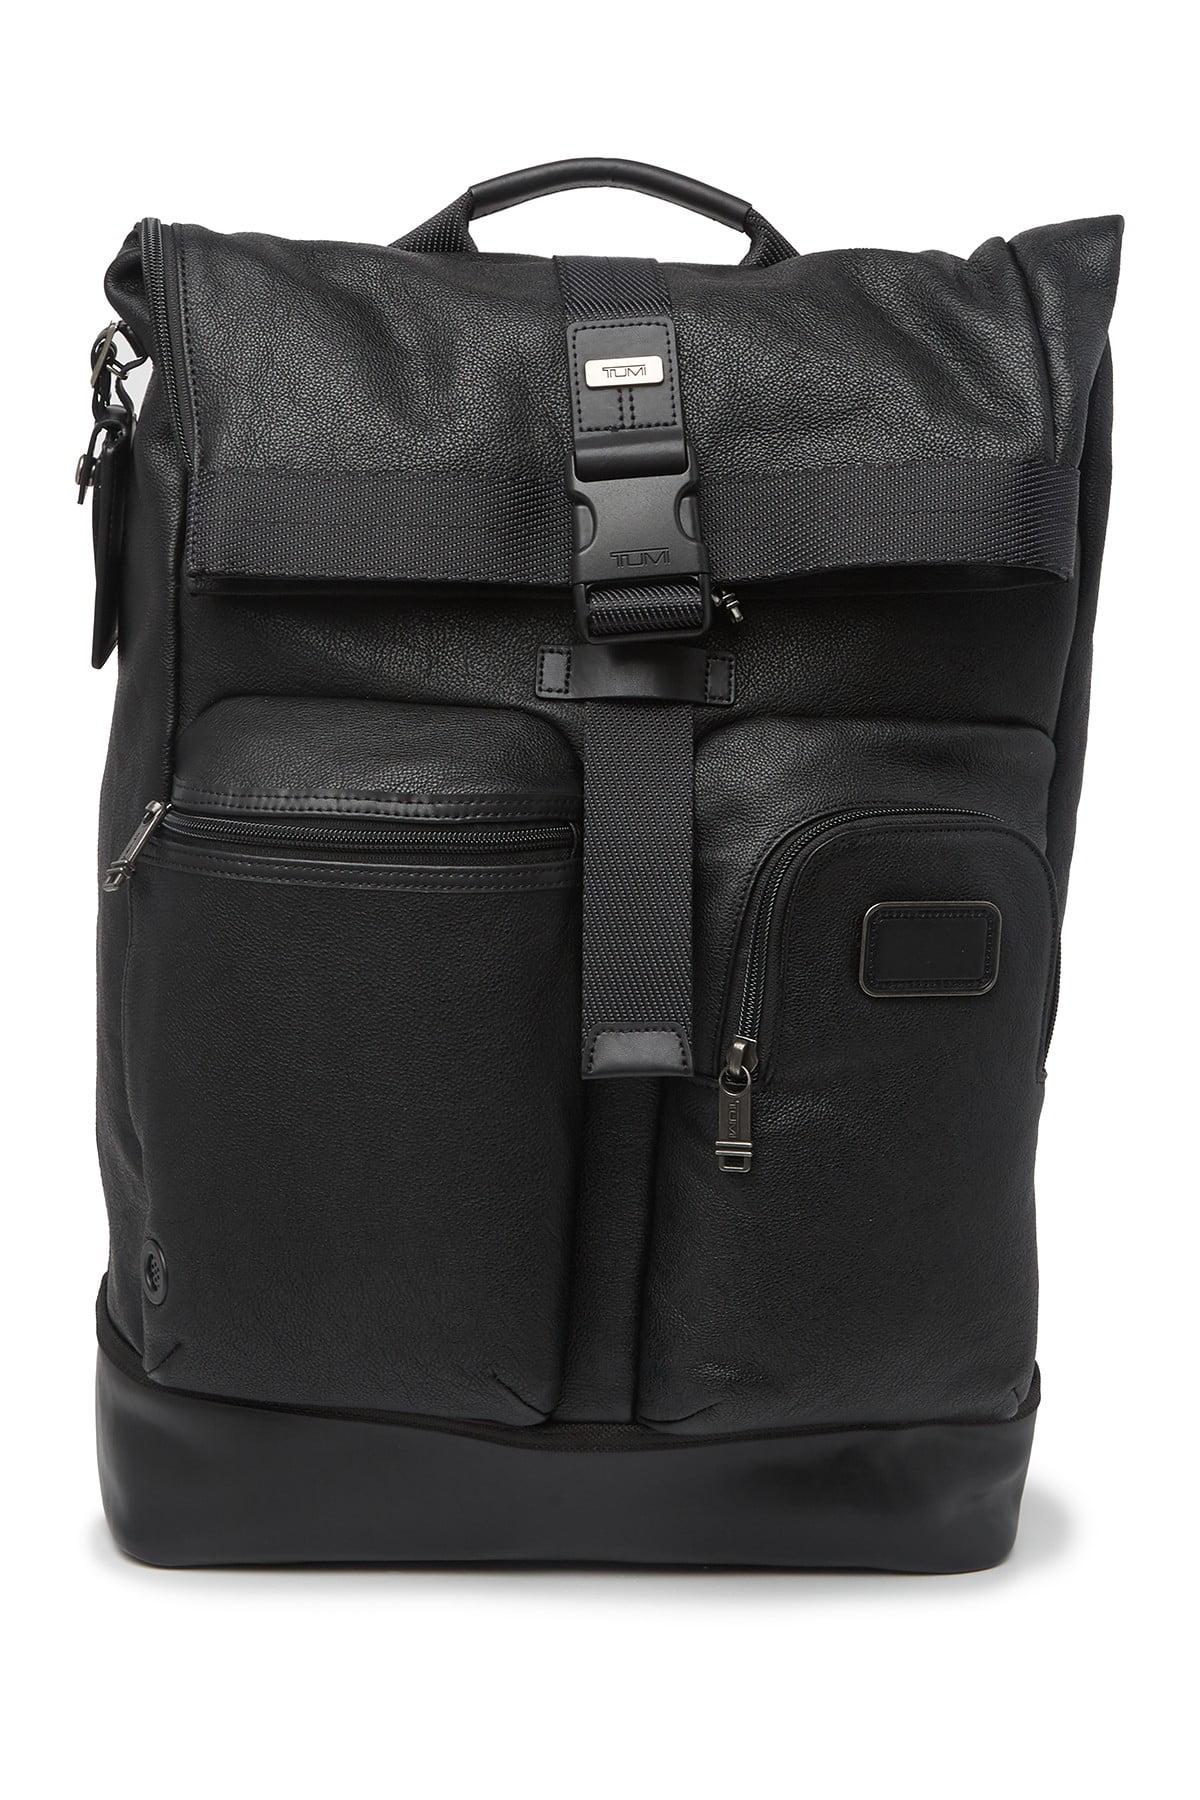 tumi cypress backpack, great trade off 57% - www.sweetpaws.gr